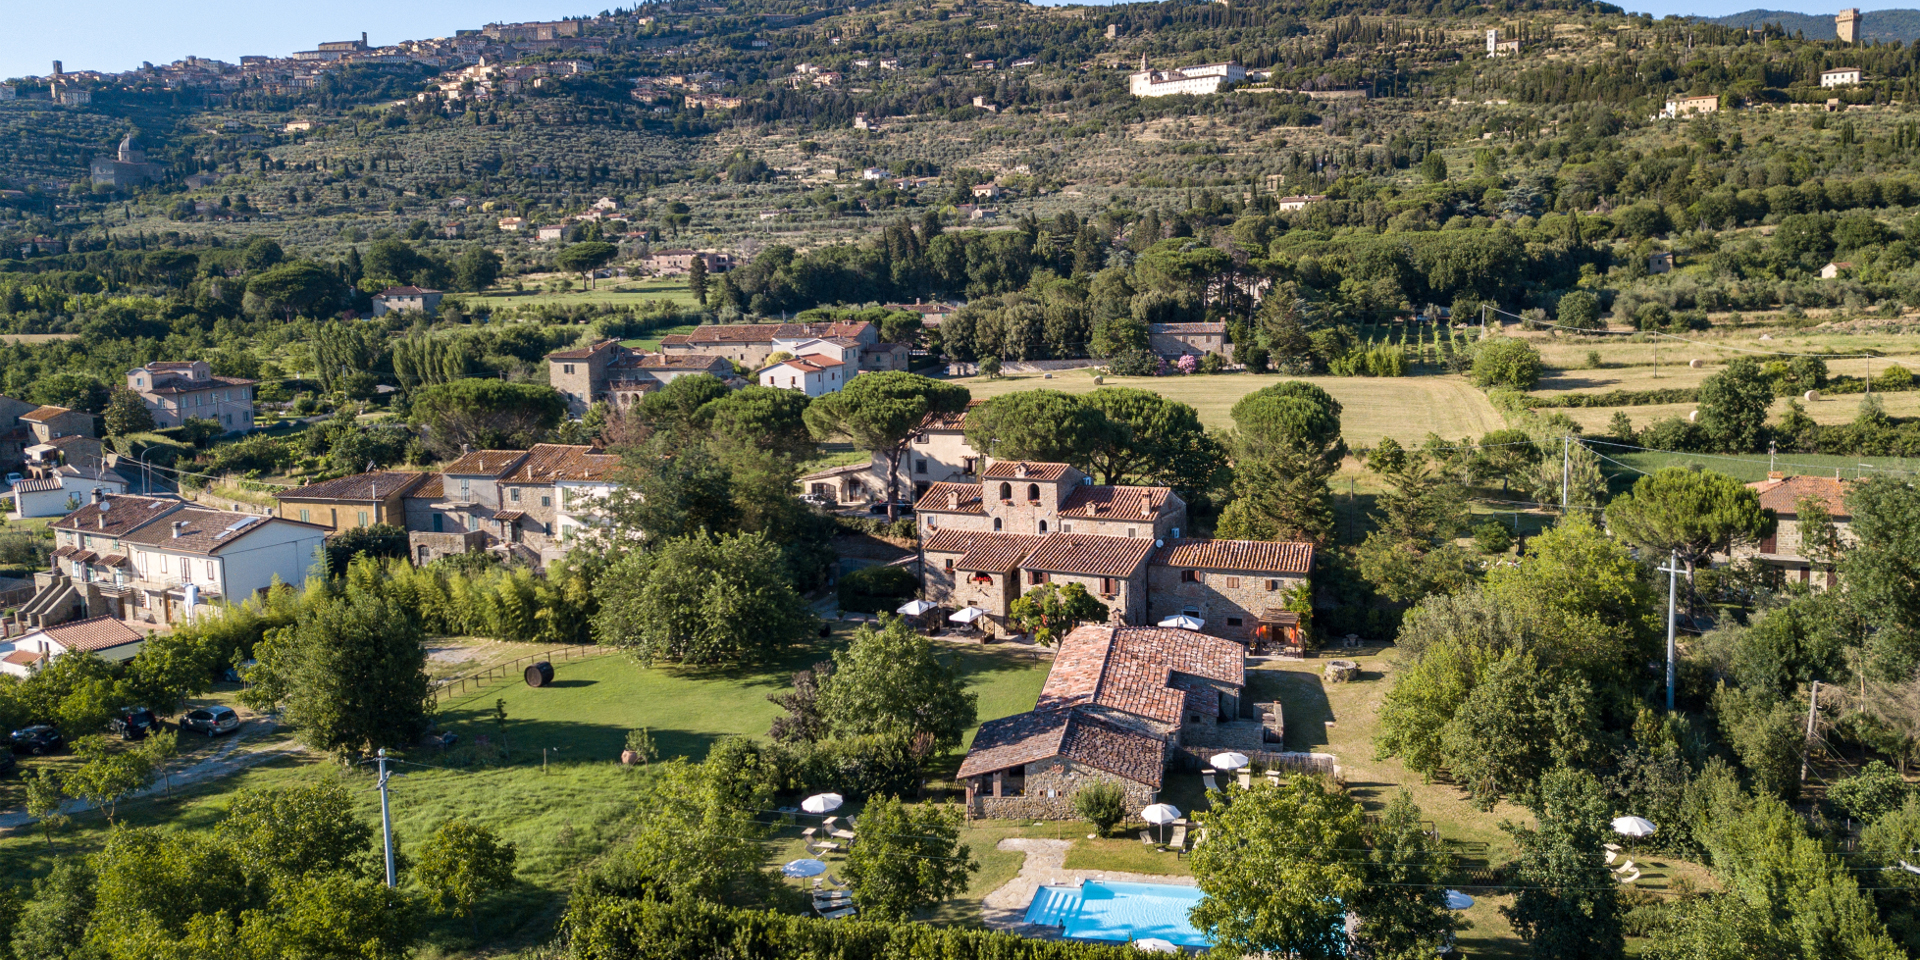 Picture 8: Farmhouse Monastero San Silvestro, an aerial photograph taken by a camera attached to a drone